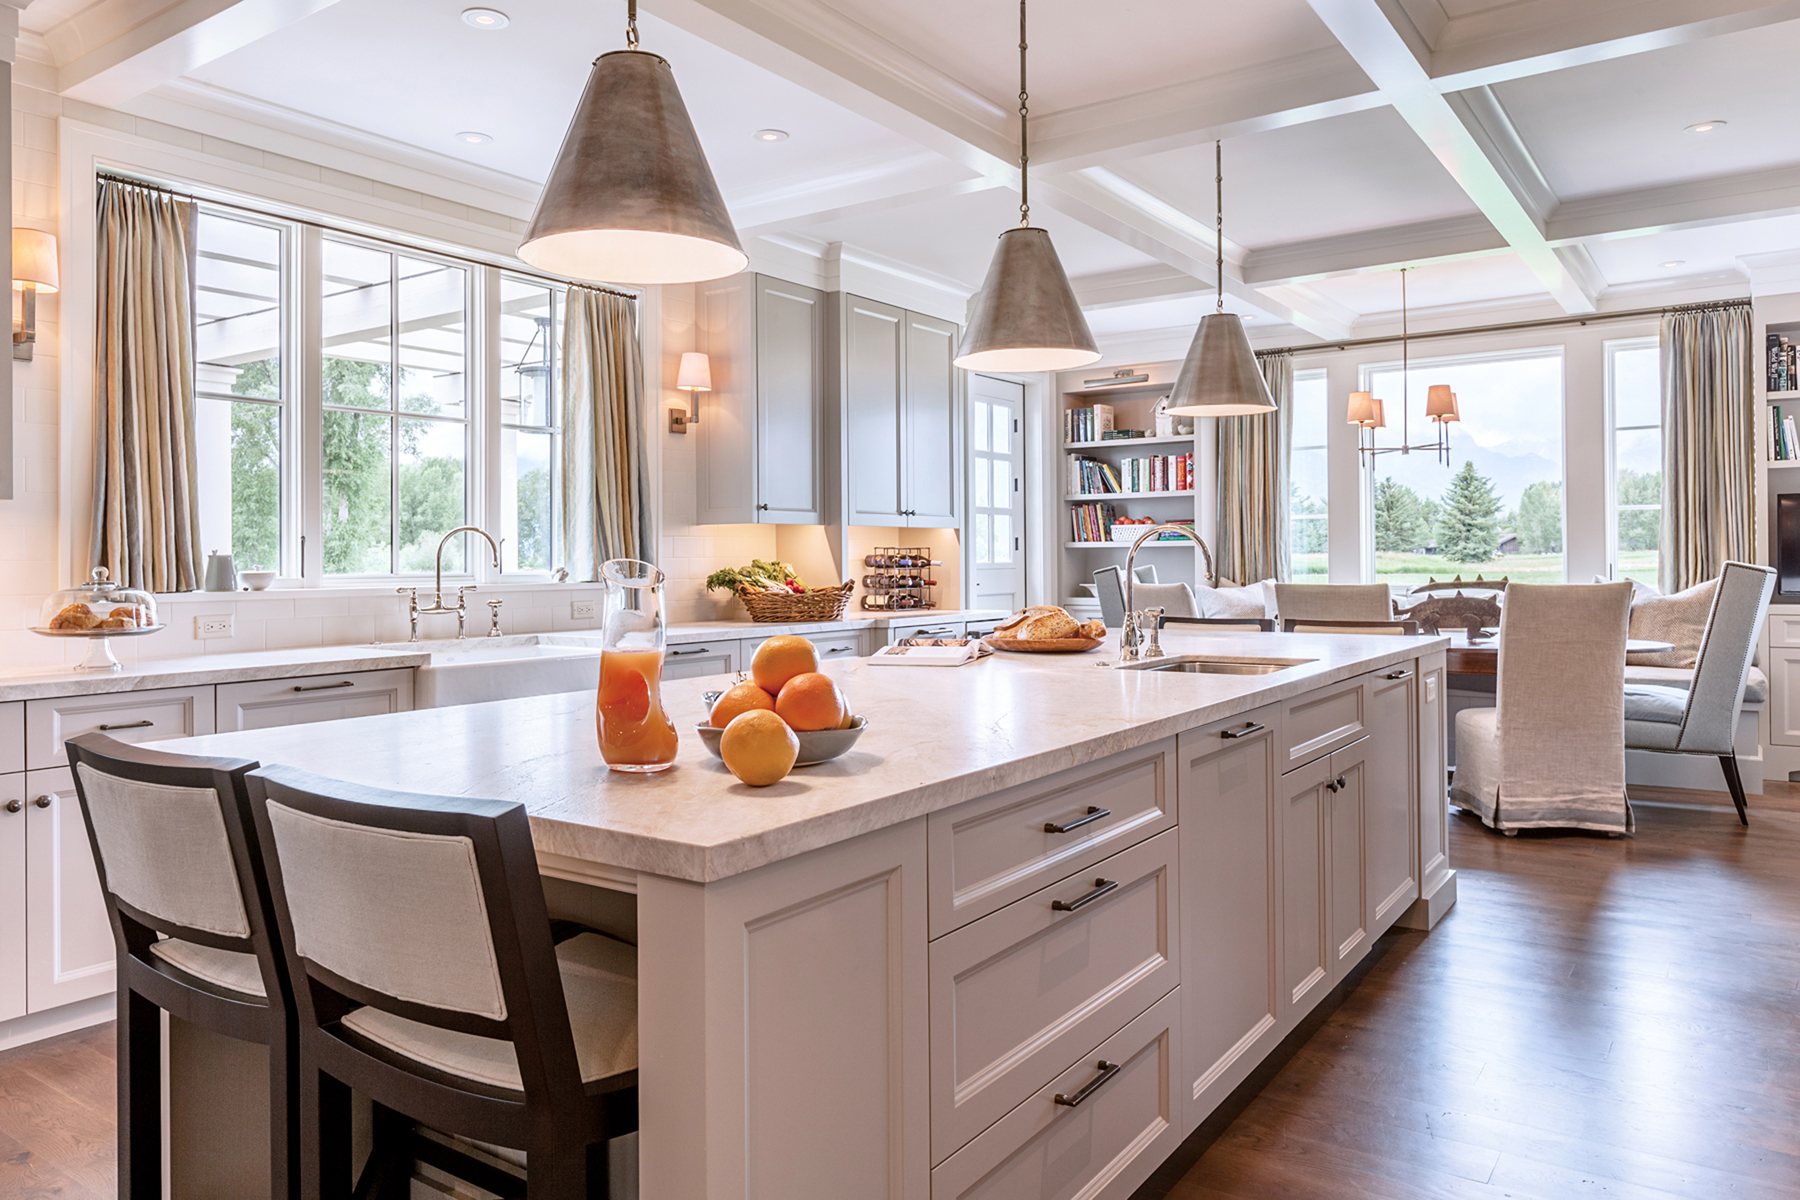 An East Coast ranch style home in Jackson Hole created by WRJ Design features a light-filled functional kitchen that blends traditional and contemporary elements while embracing the views.